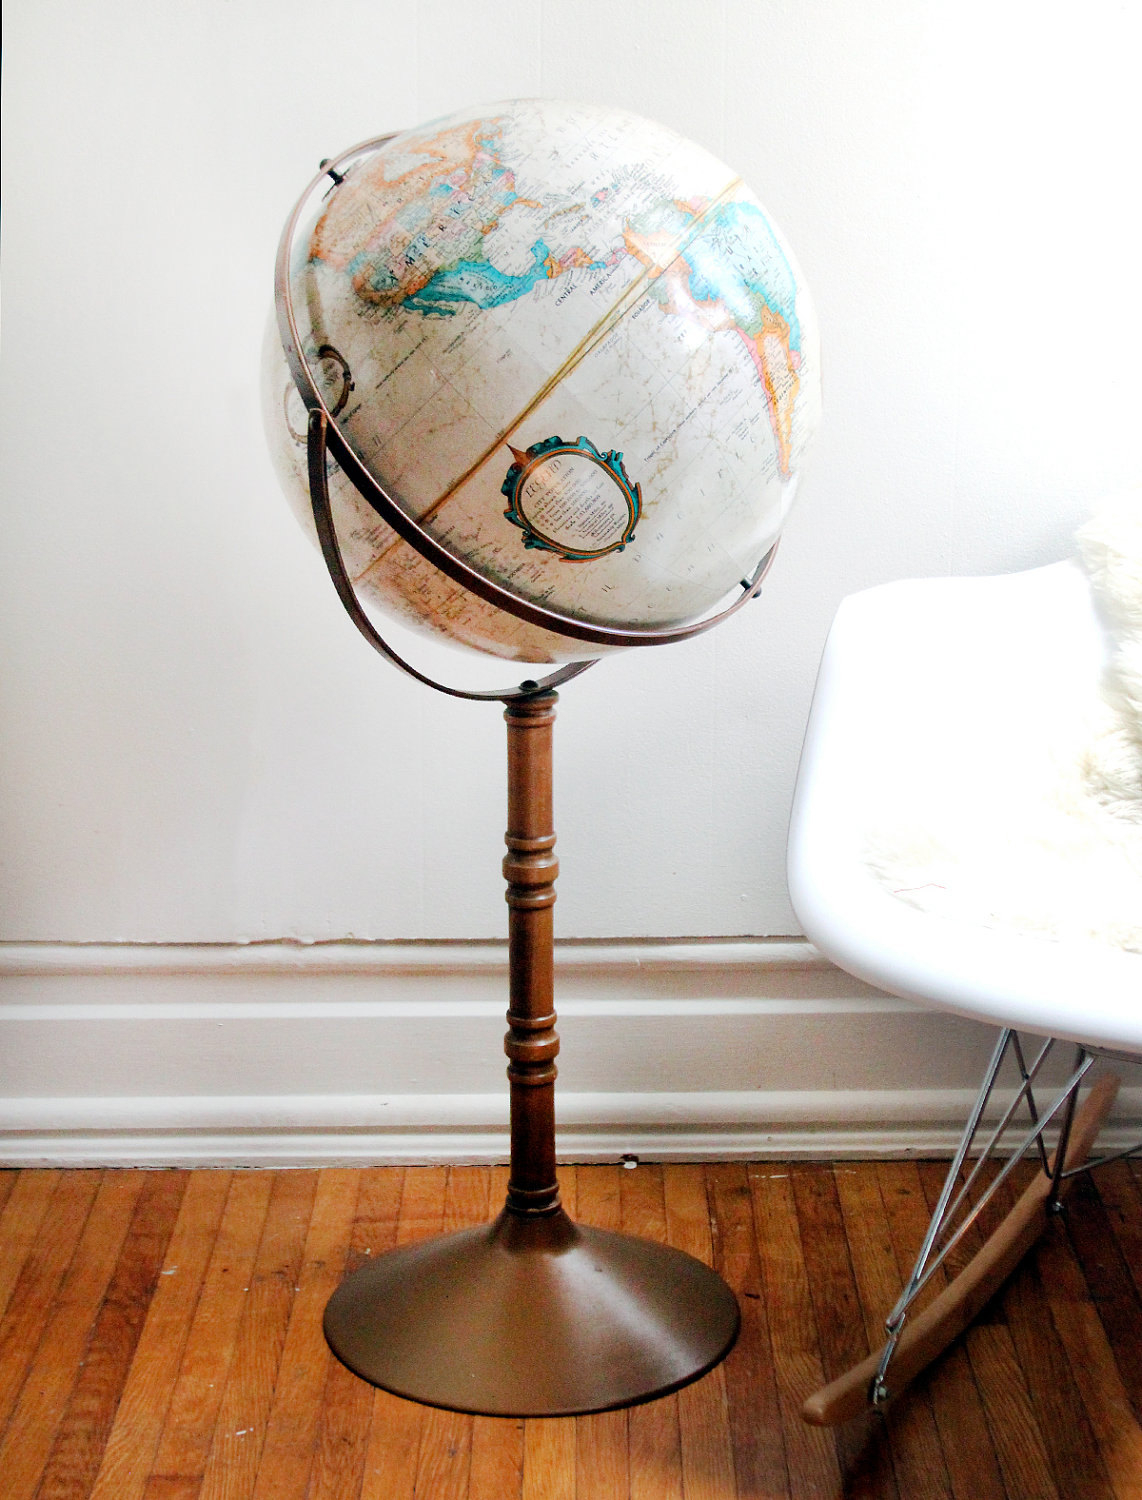 Always dreamed of finding a cheap vintage standing floor globe